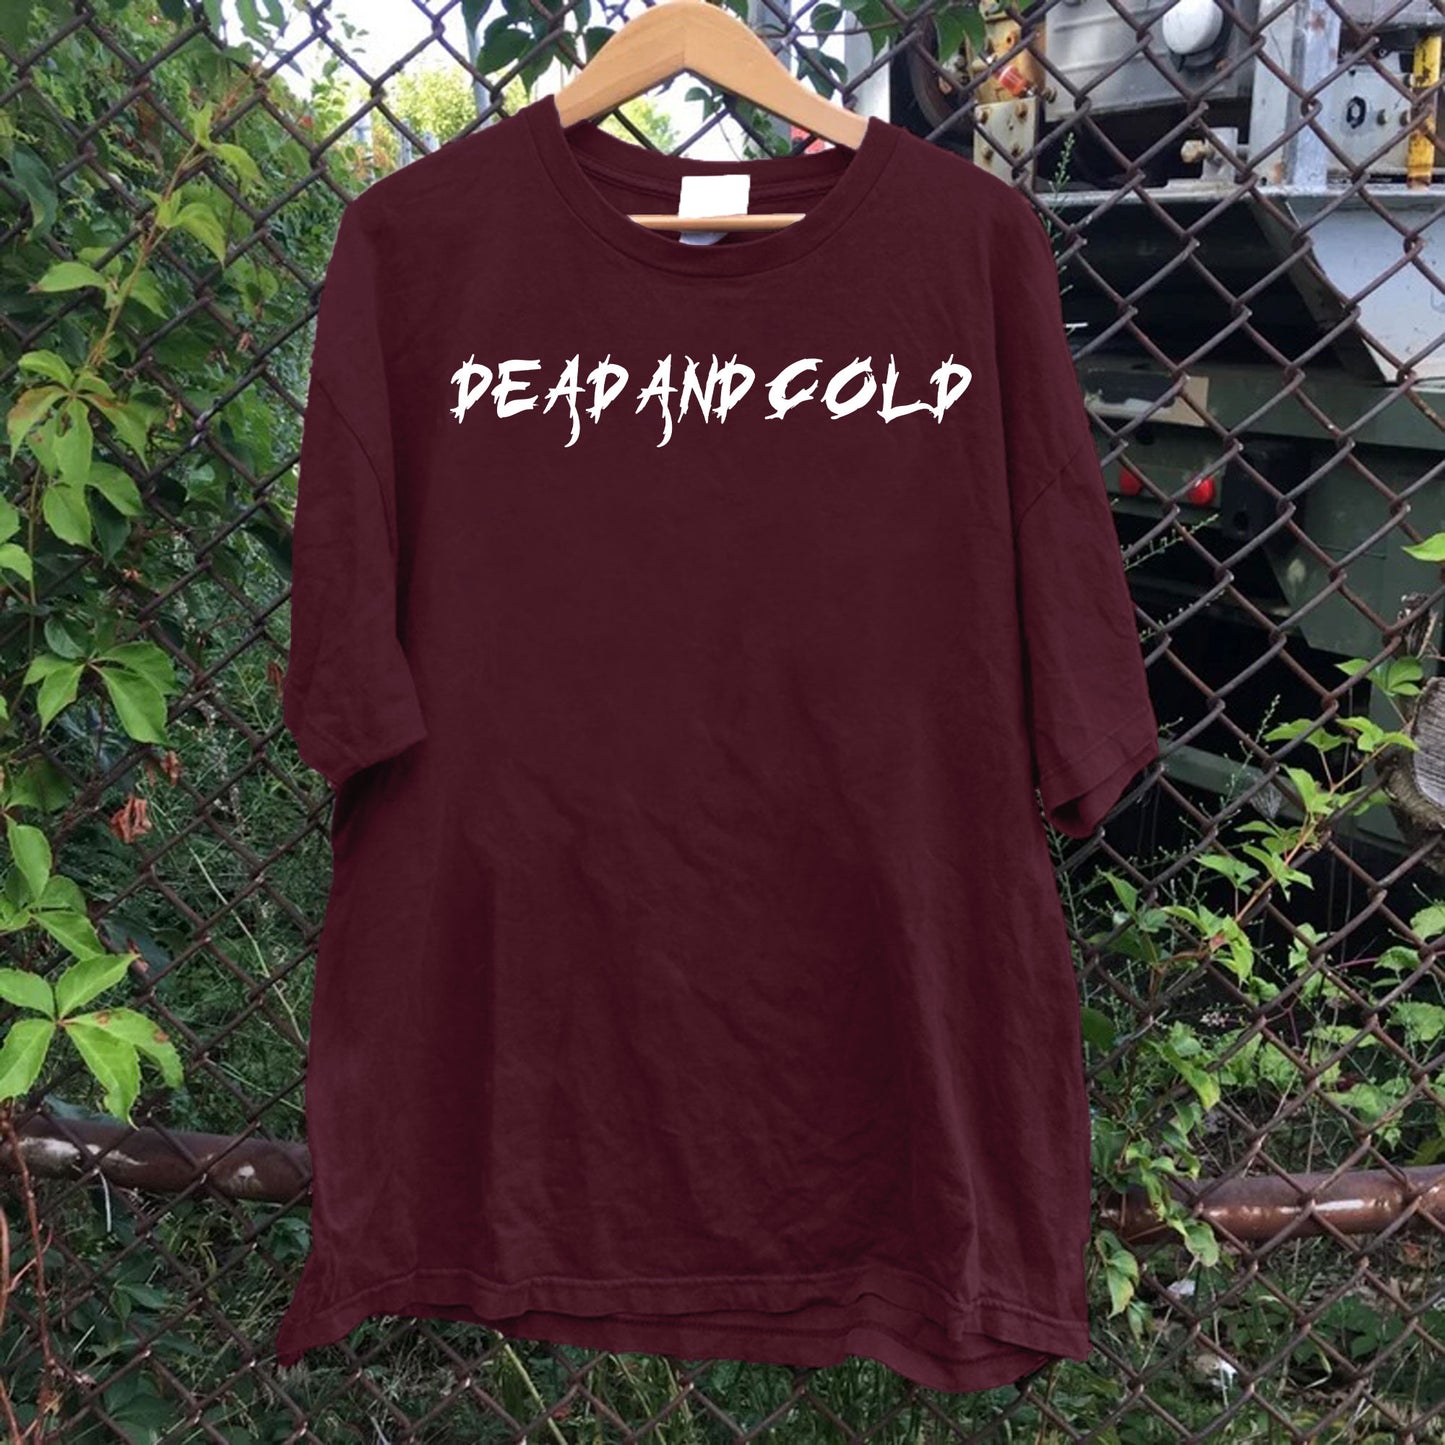 Dead And Cold Font Tee